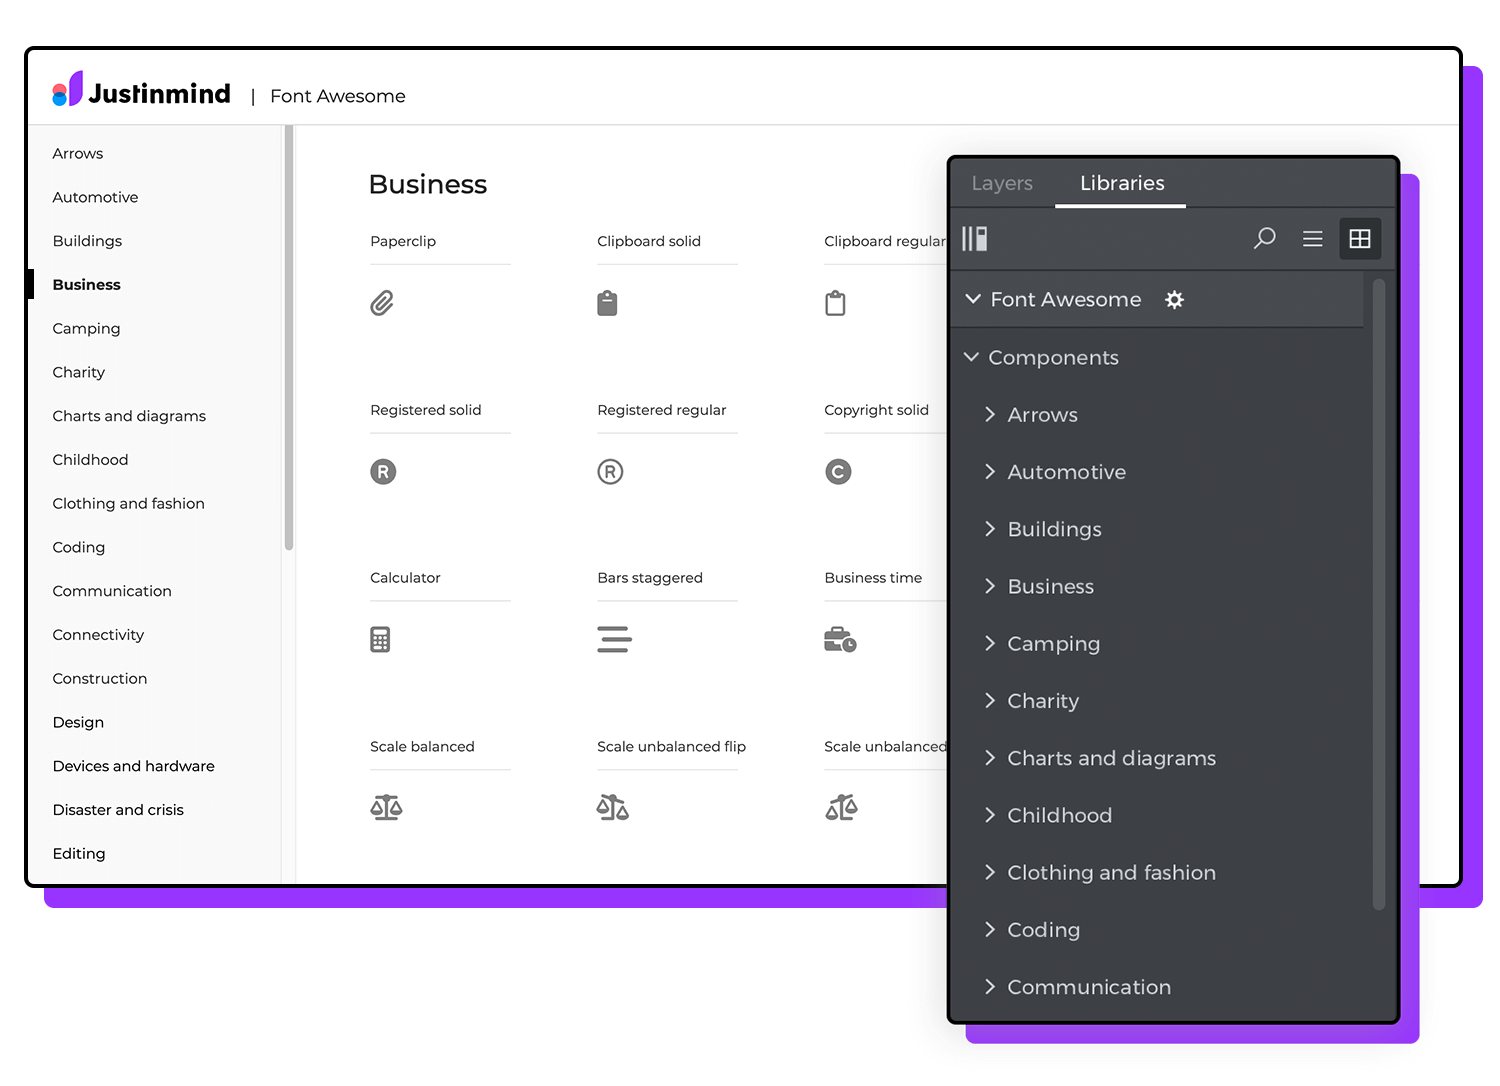 Font Awesome UI library categories